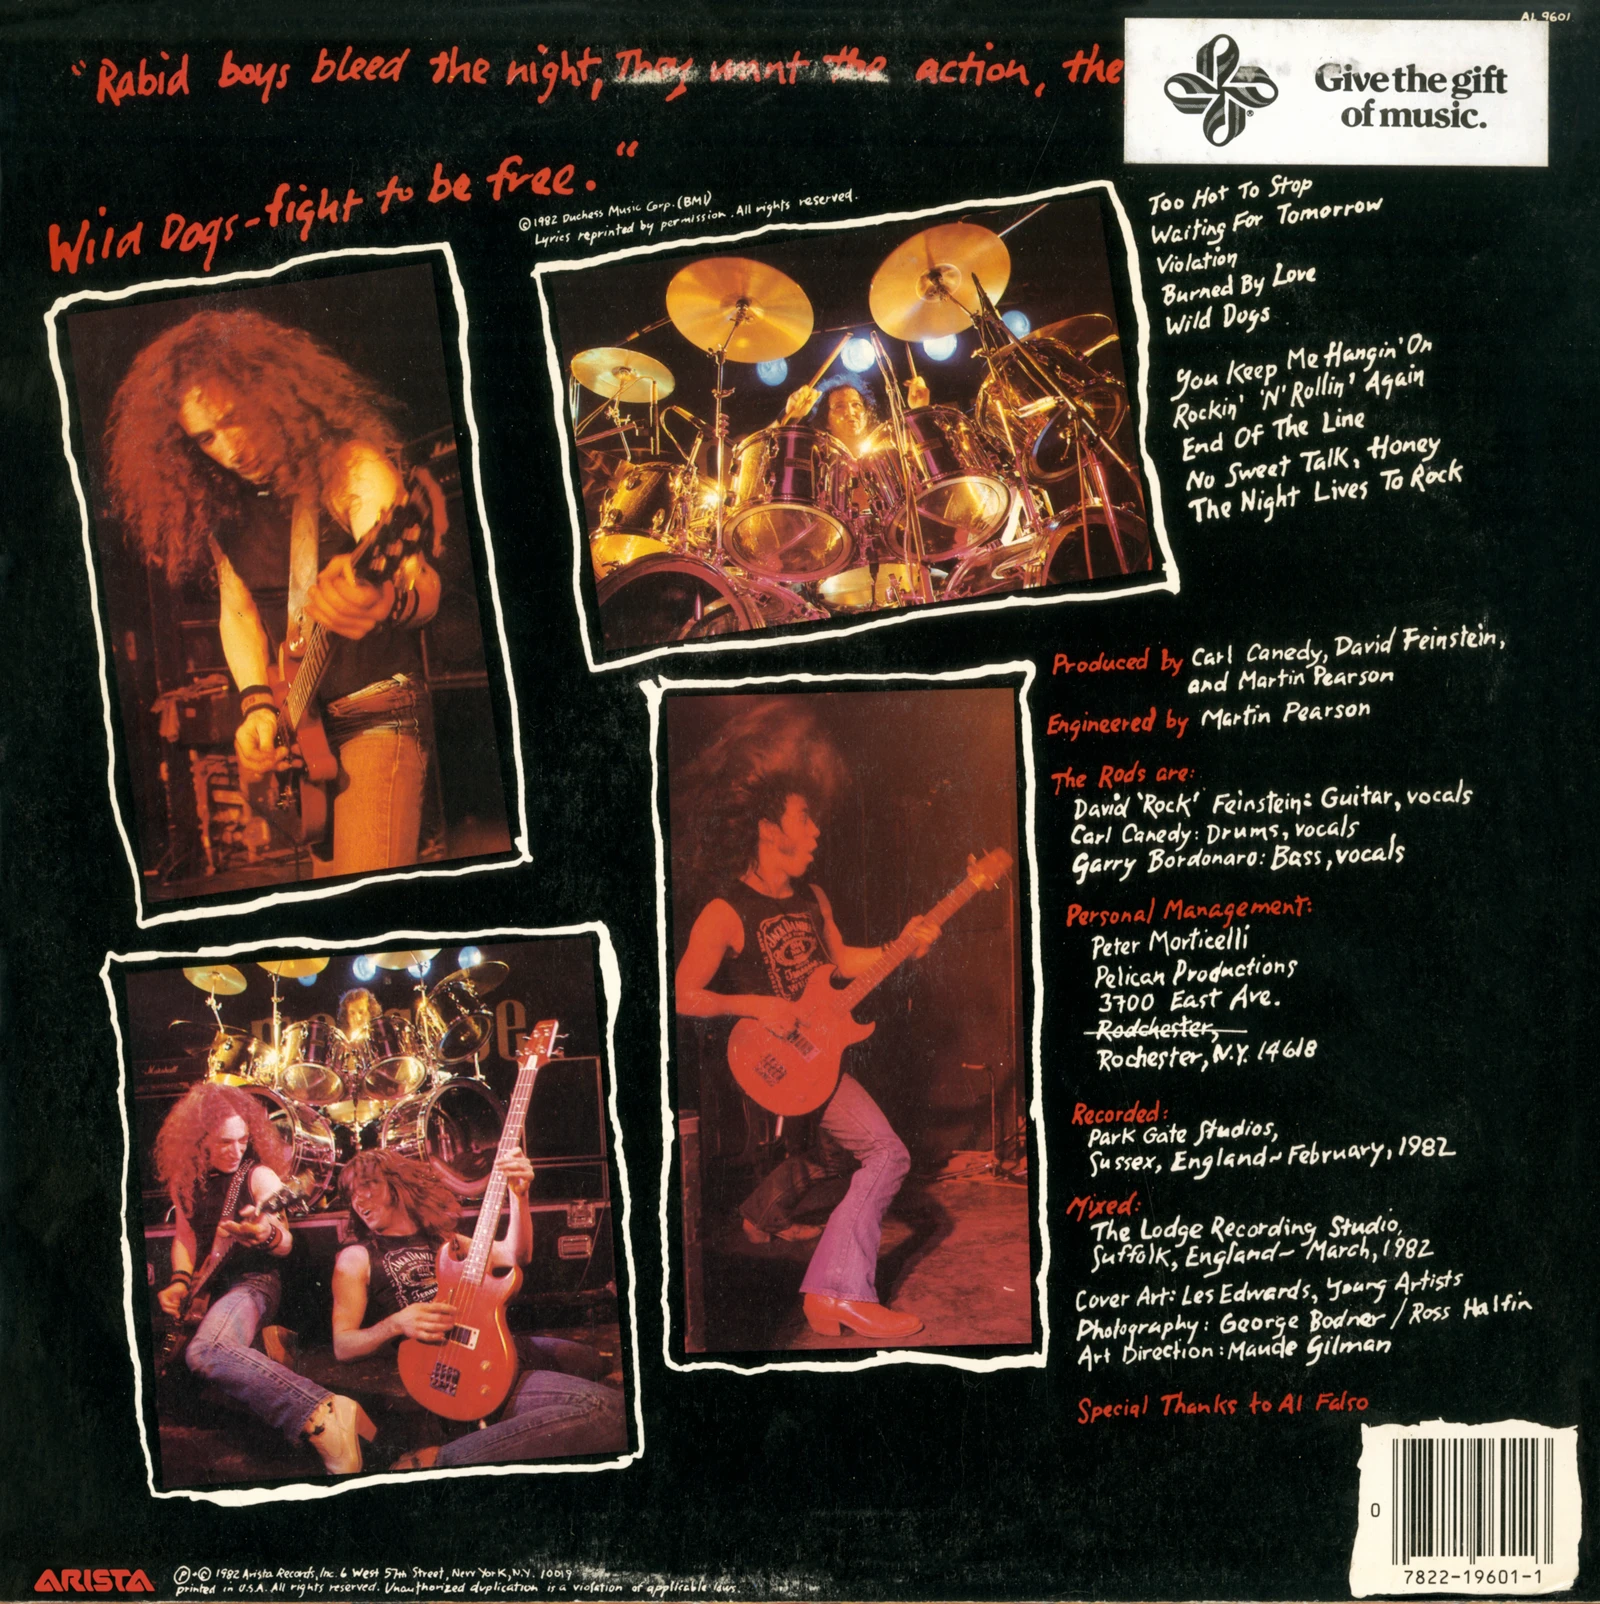 Wild Dogs – The Rod back cover